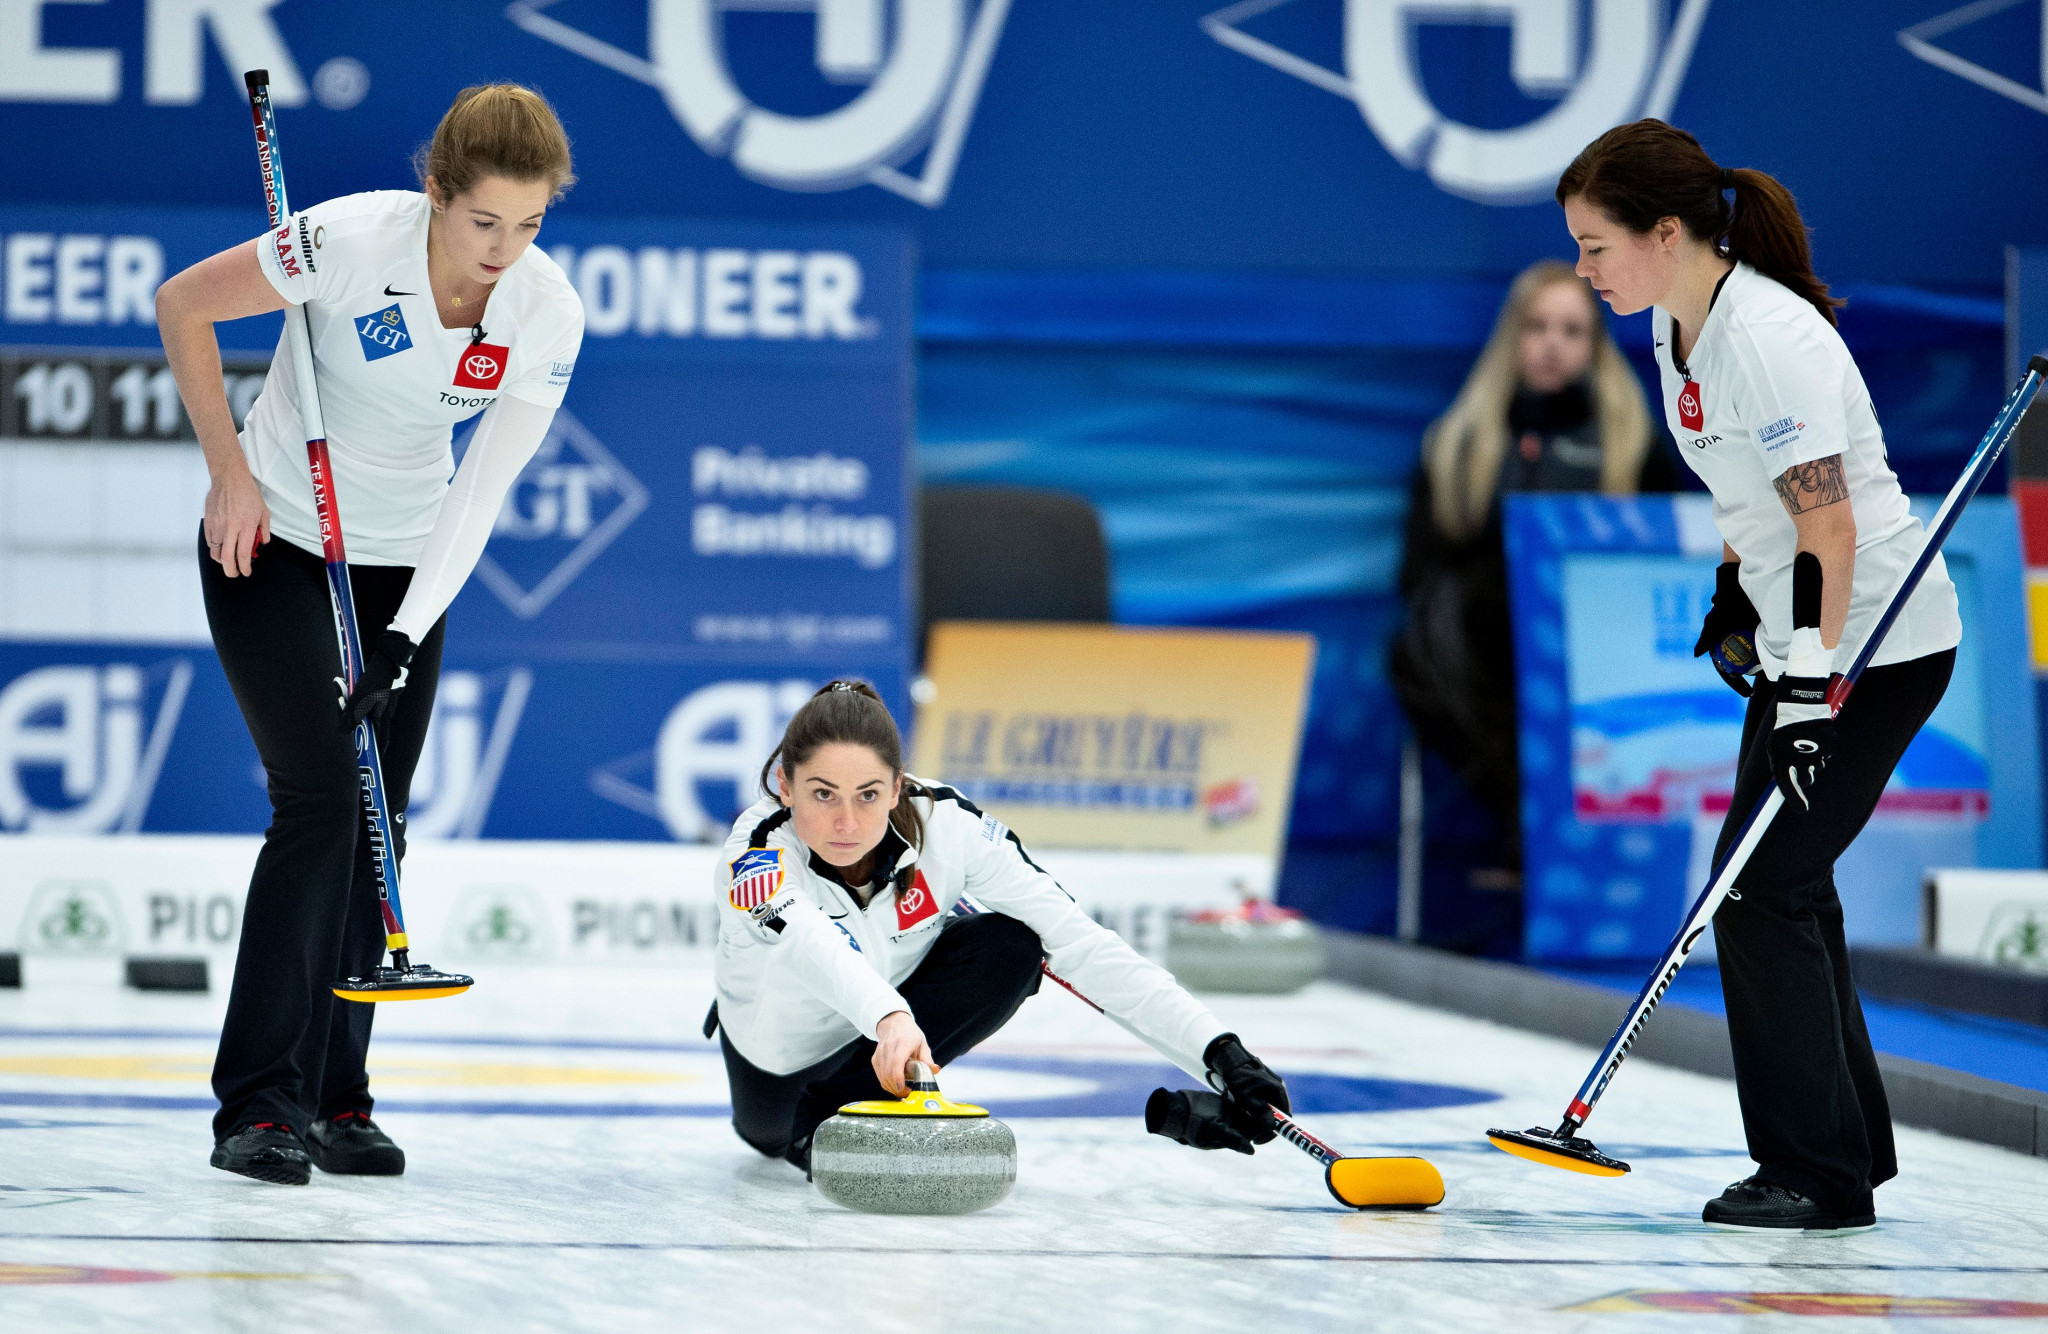 USA Curling announce New York's Franklin Group as promotions partner